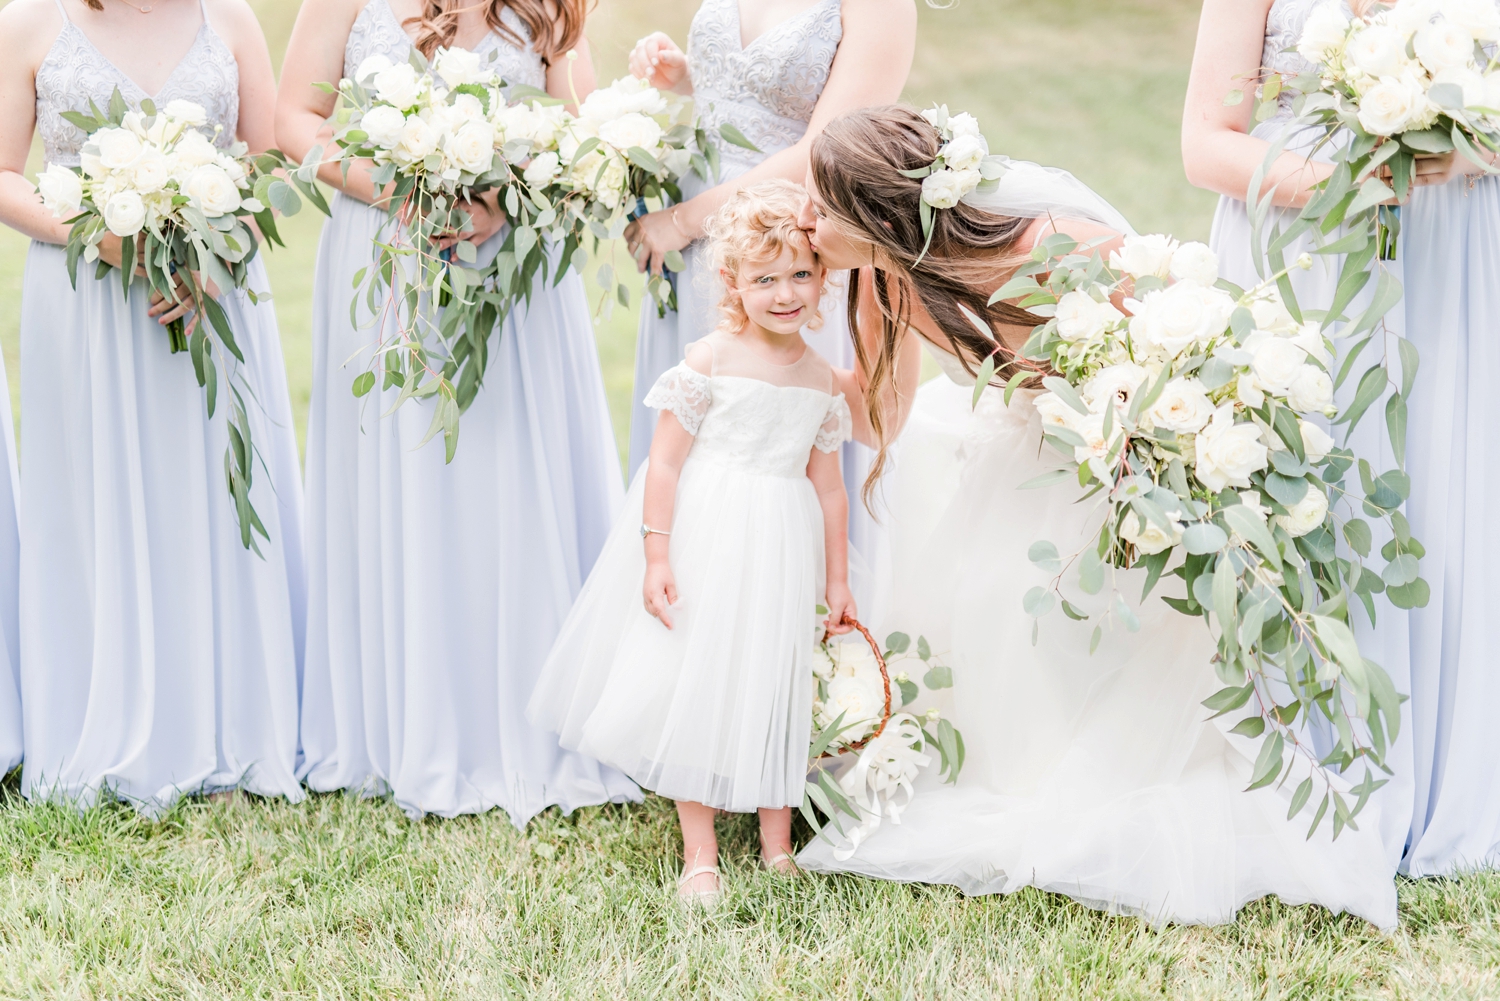 Bride-reaching-down-to-kiss-the-flower-girl